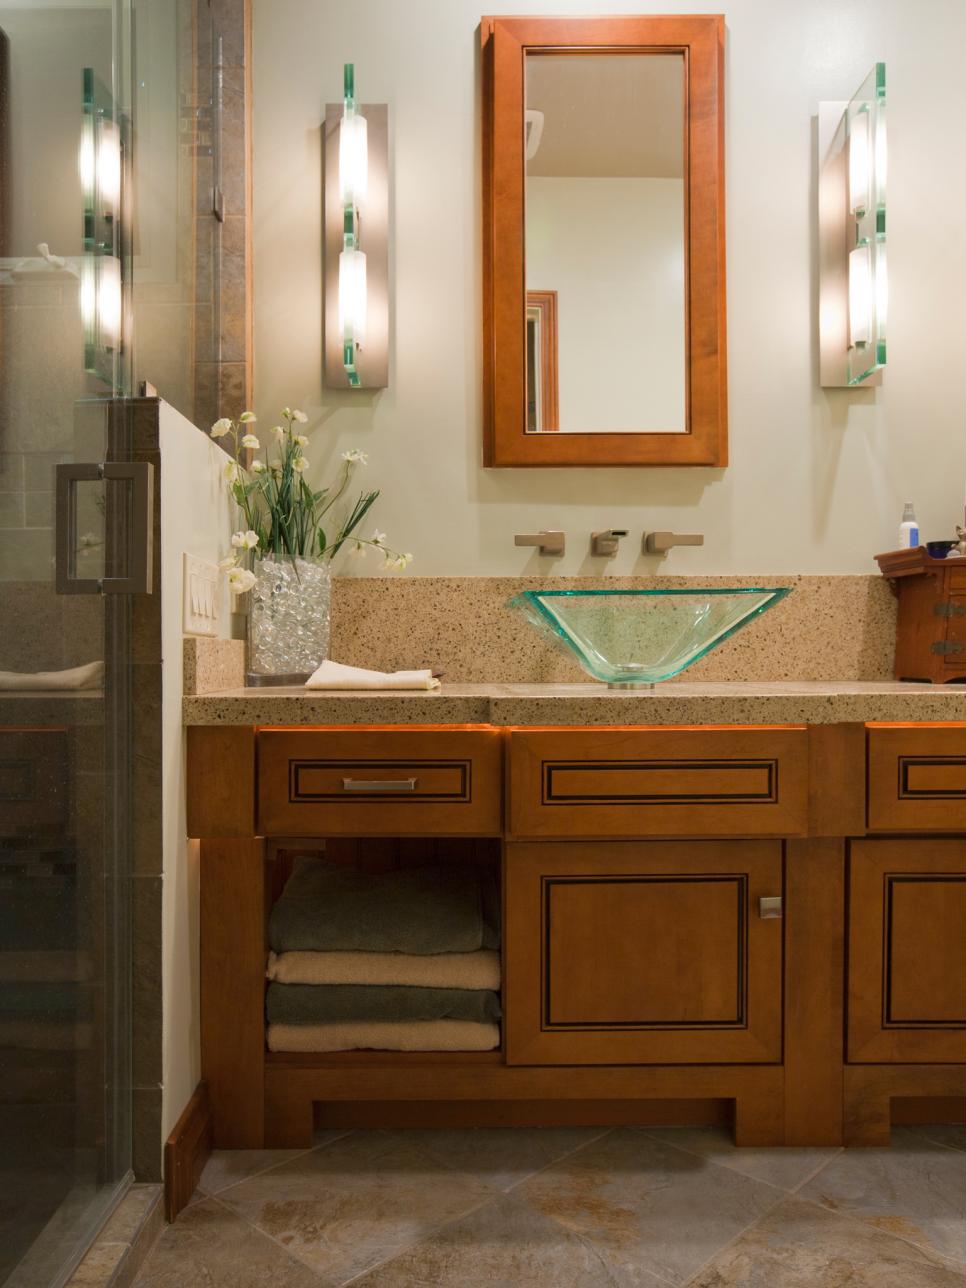 Bathroom with a Green Glass Sink and Granite Countertops